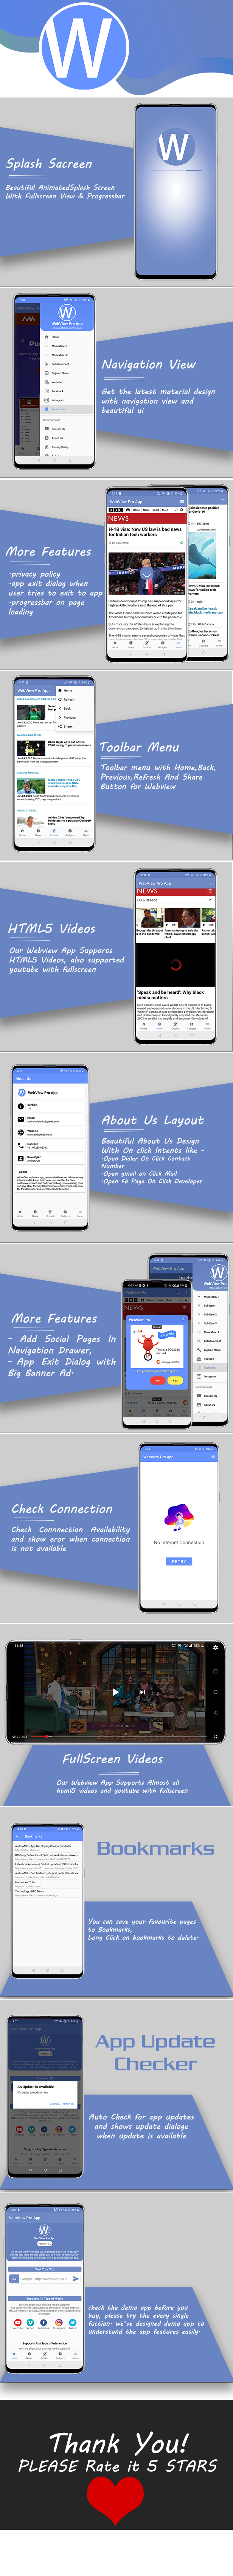 WebPro - Easy Configurable Android WebView Pro App Template - 1